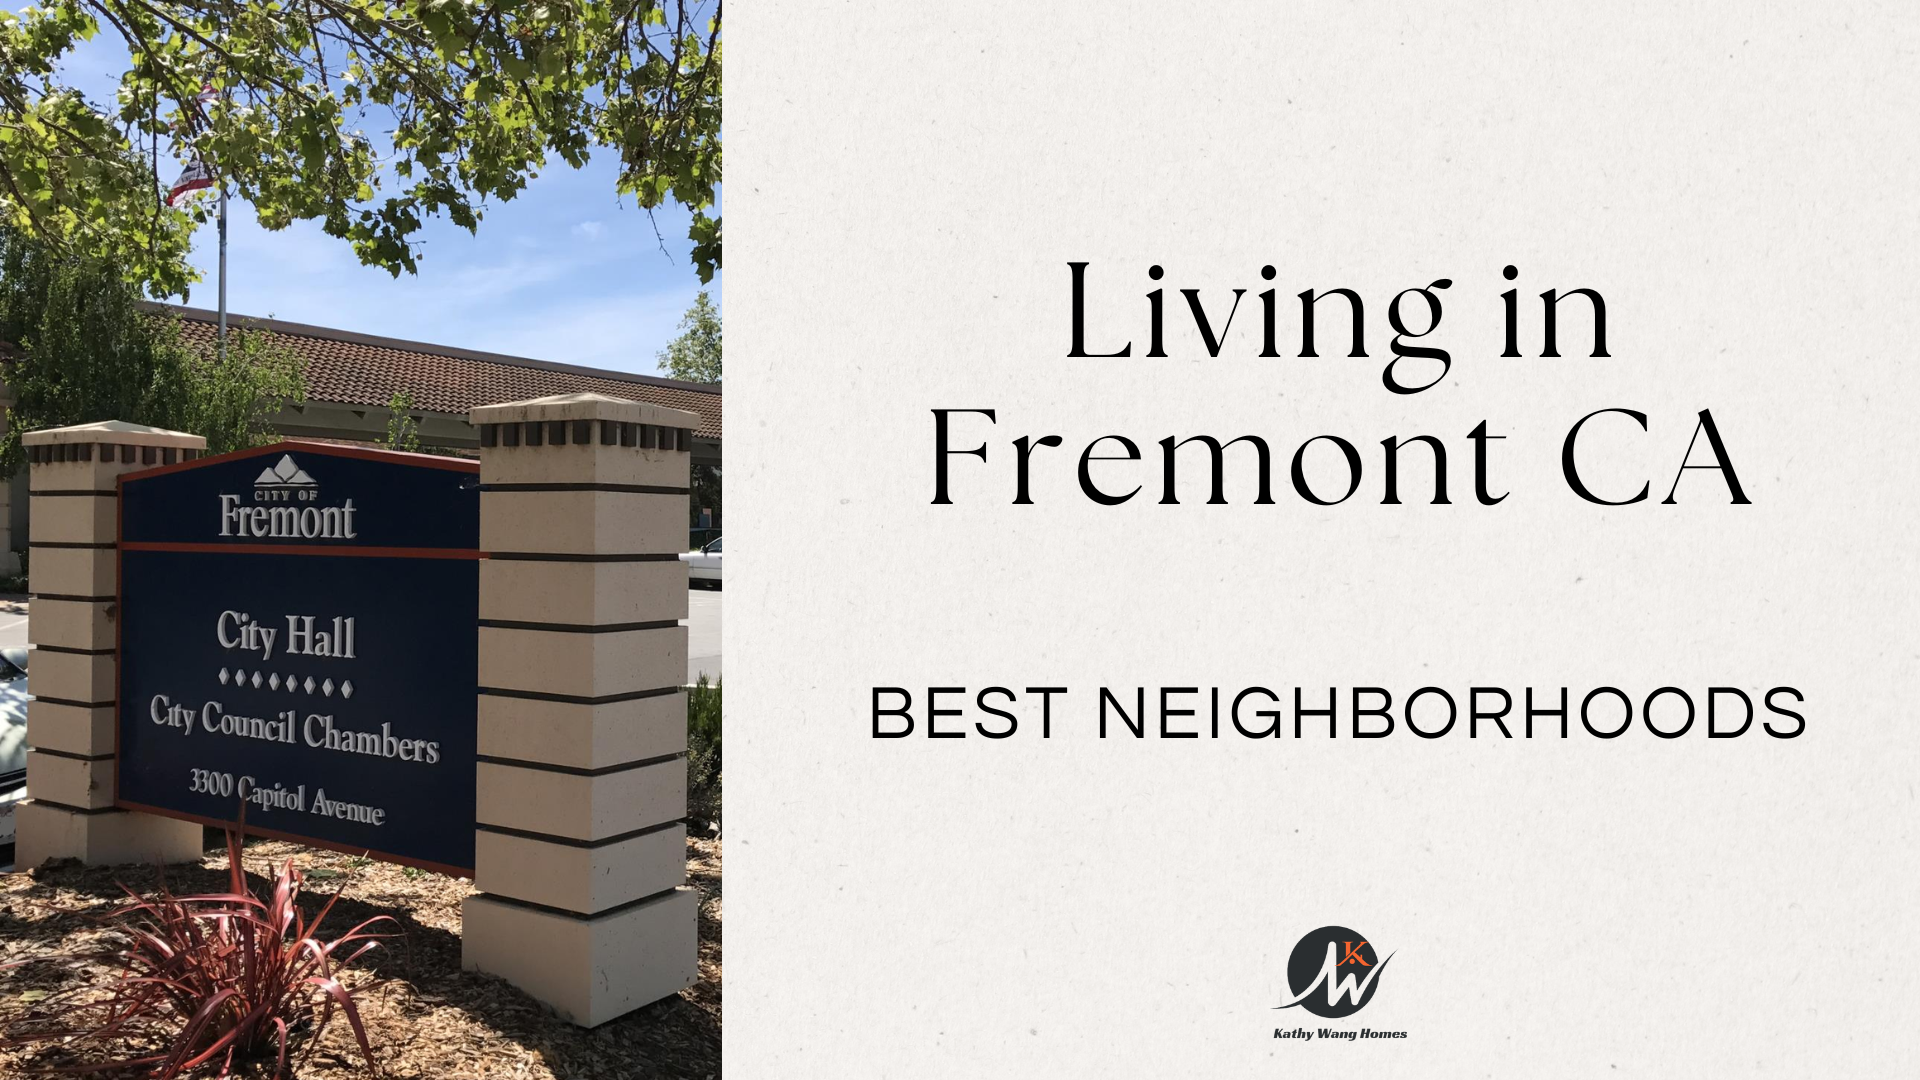 Is Fremont CA a good place to live? Best Neighbohoods in Fremont